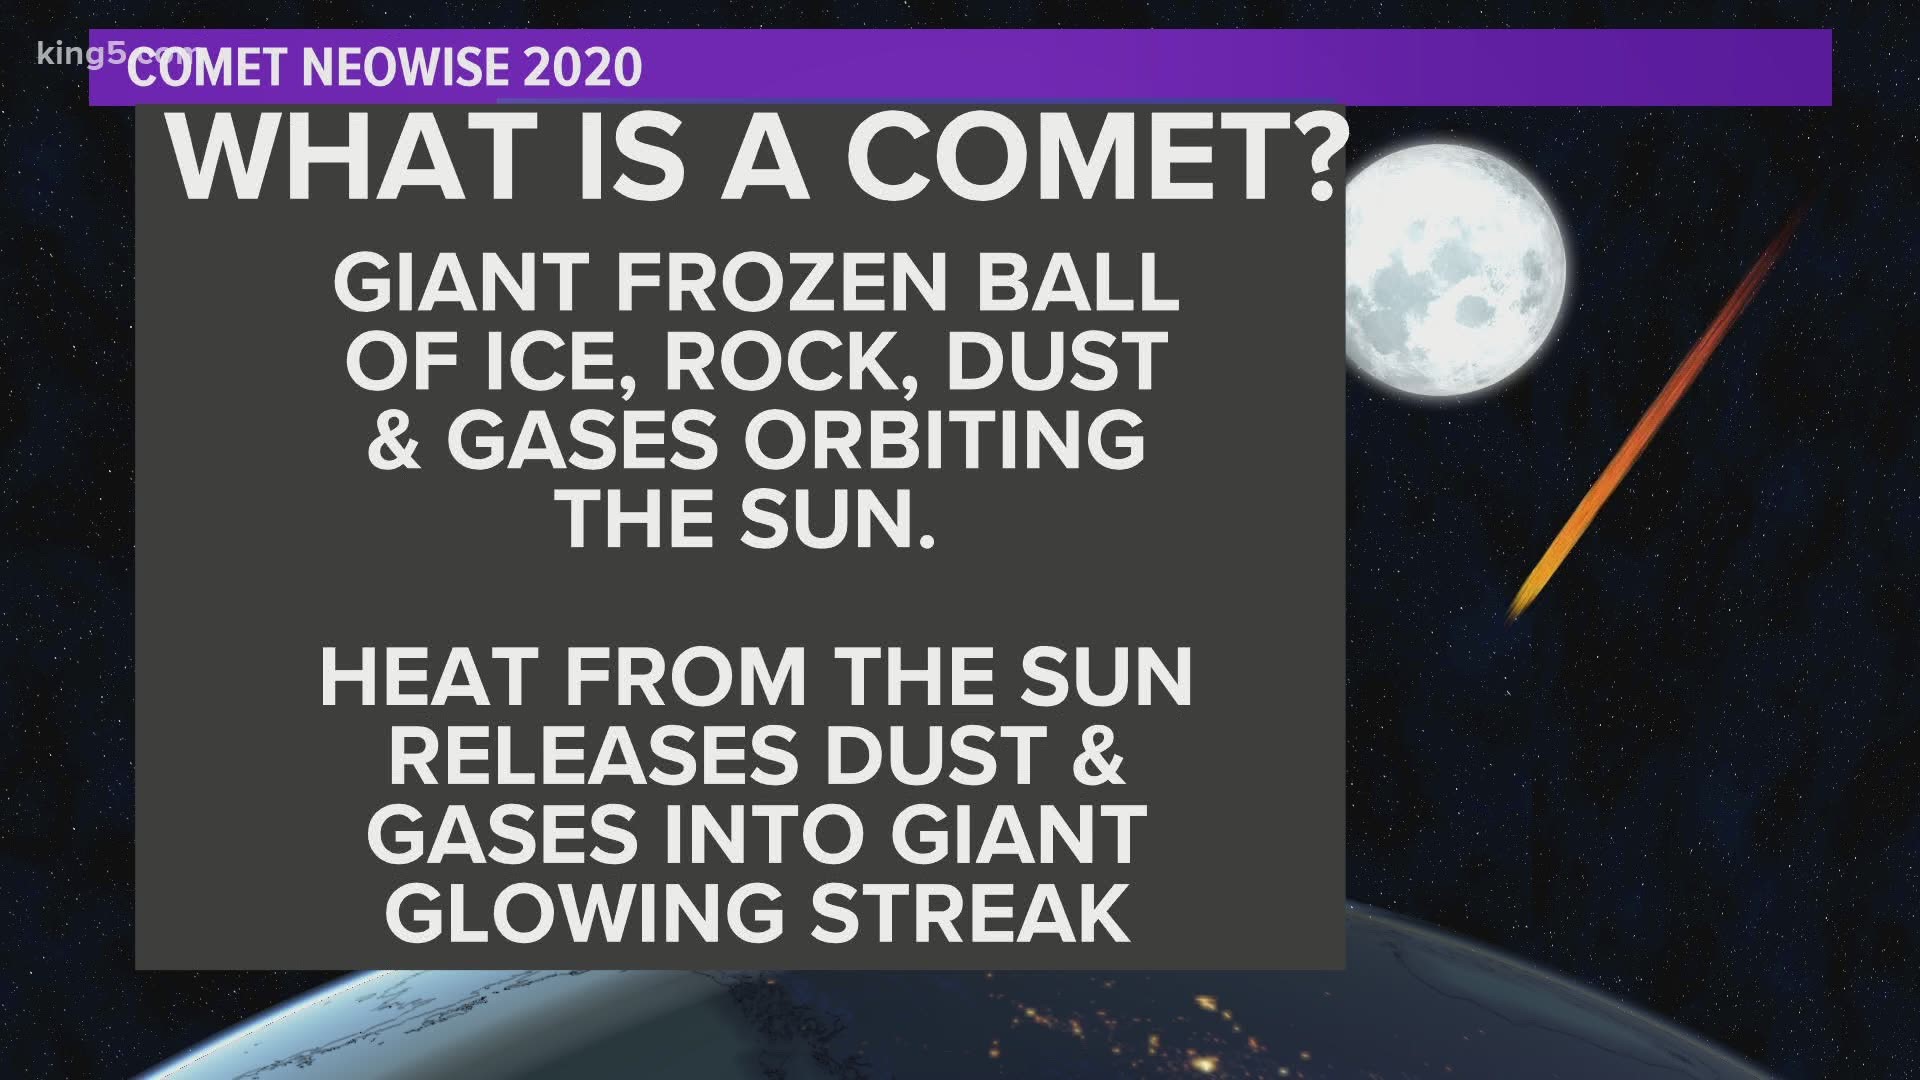 The comet made an appearance in the skies above Seattle Wednesday. The comet will be visible in the sky before sunrise all July long.